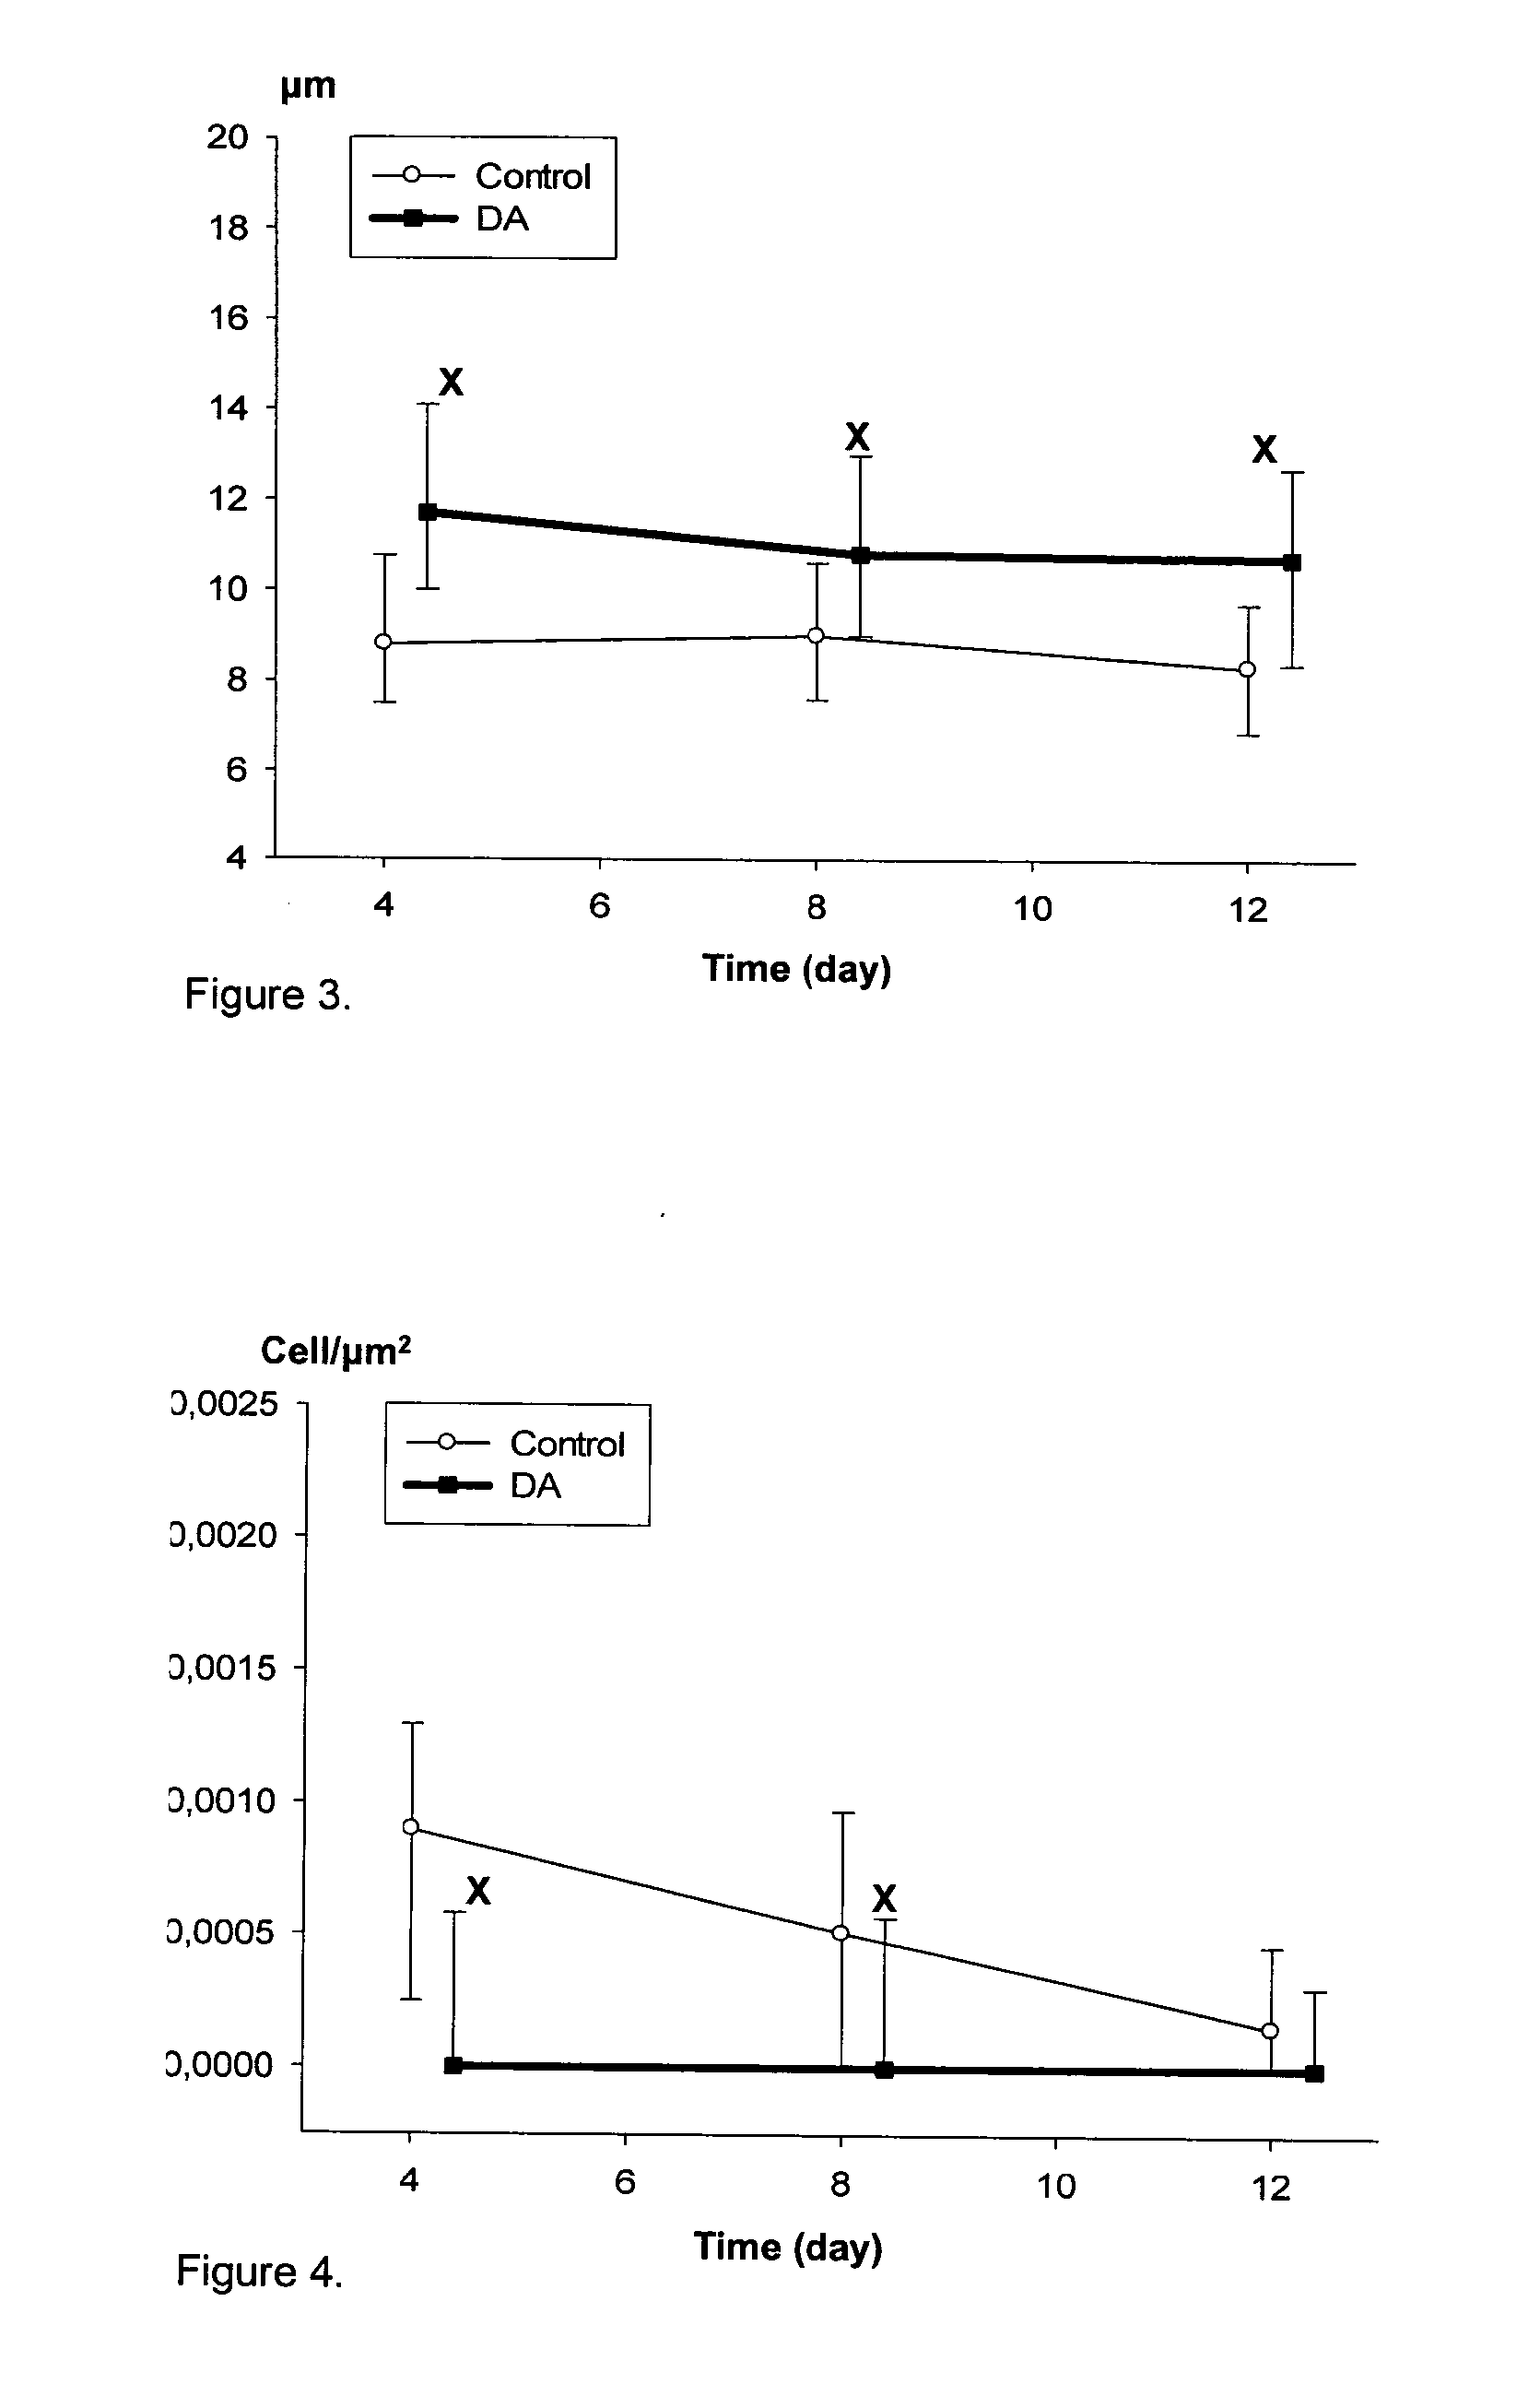 Pharmaceutical composition comprising a ryanodine receptor antagonist for facilitating wound healing